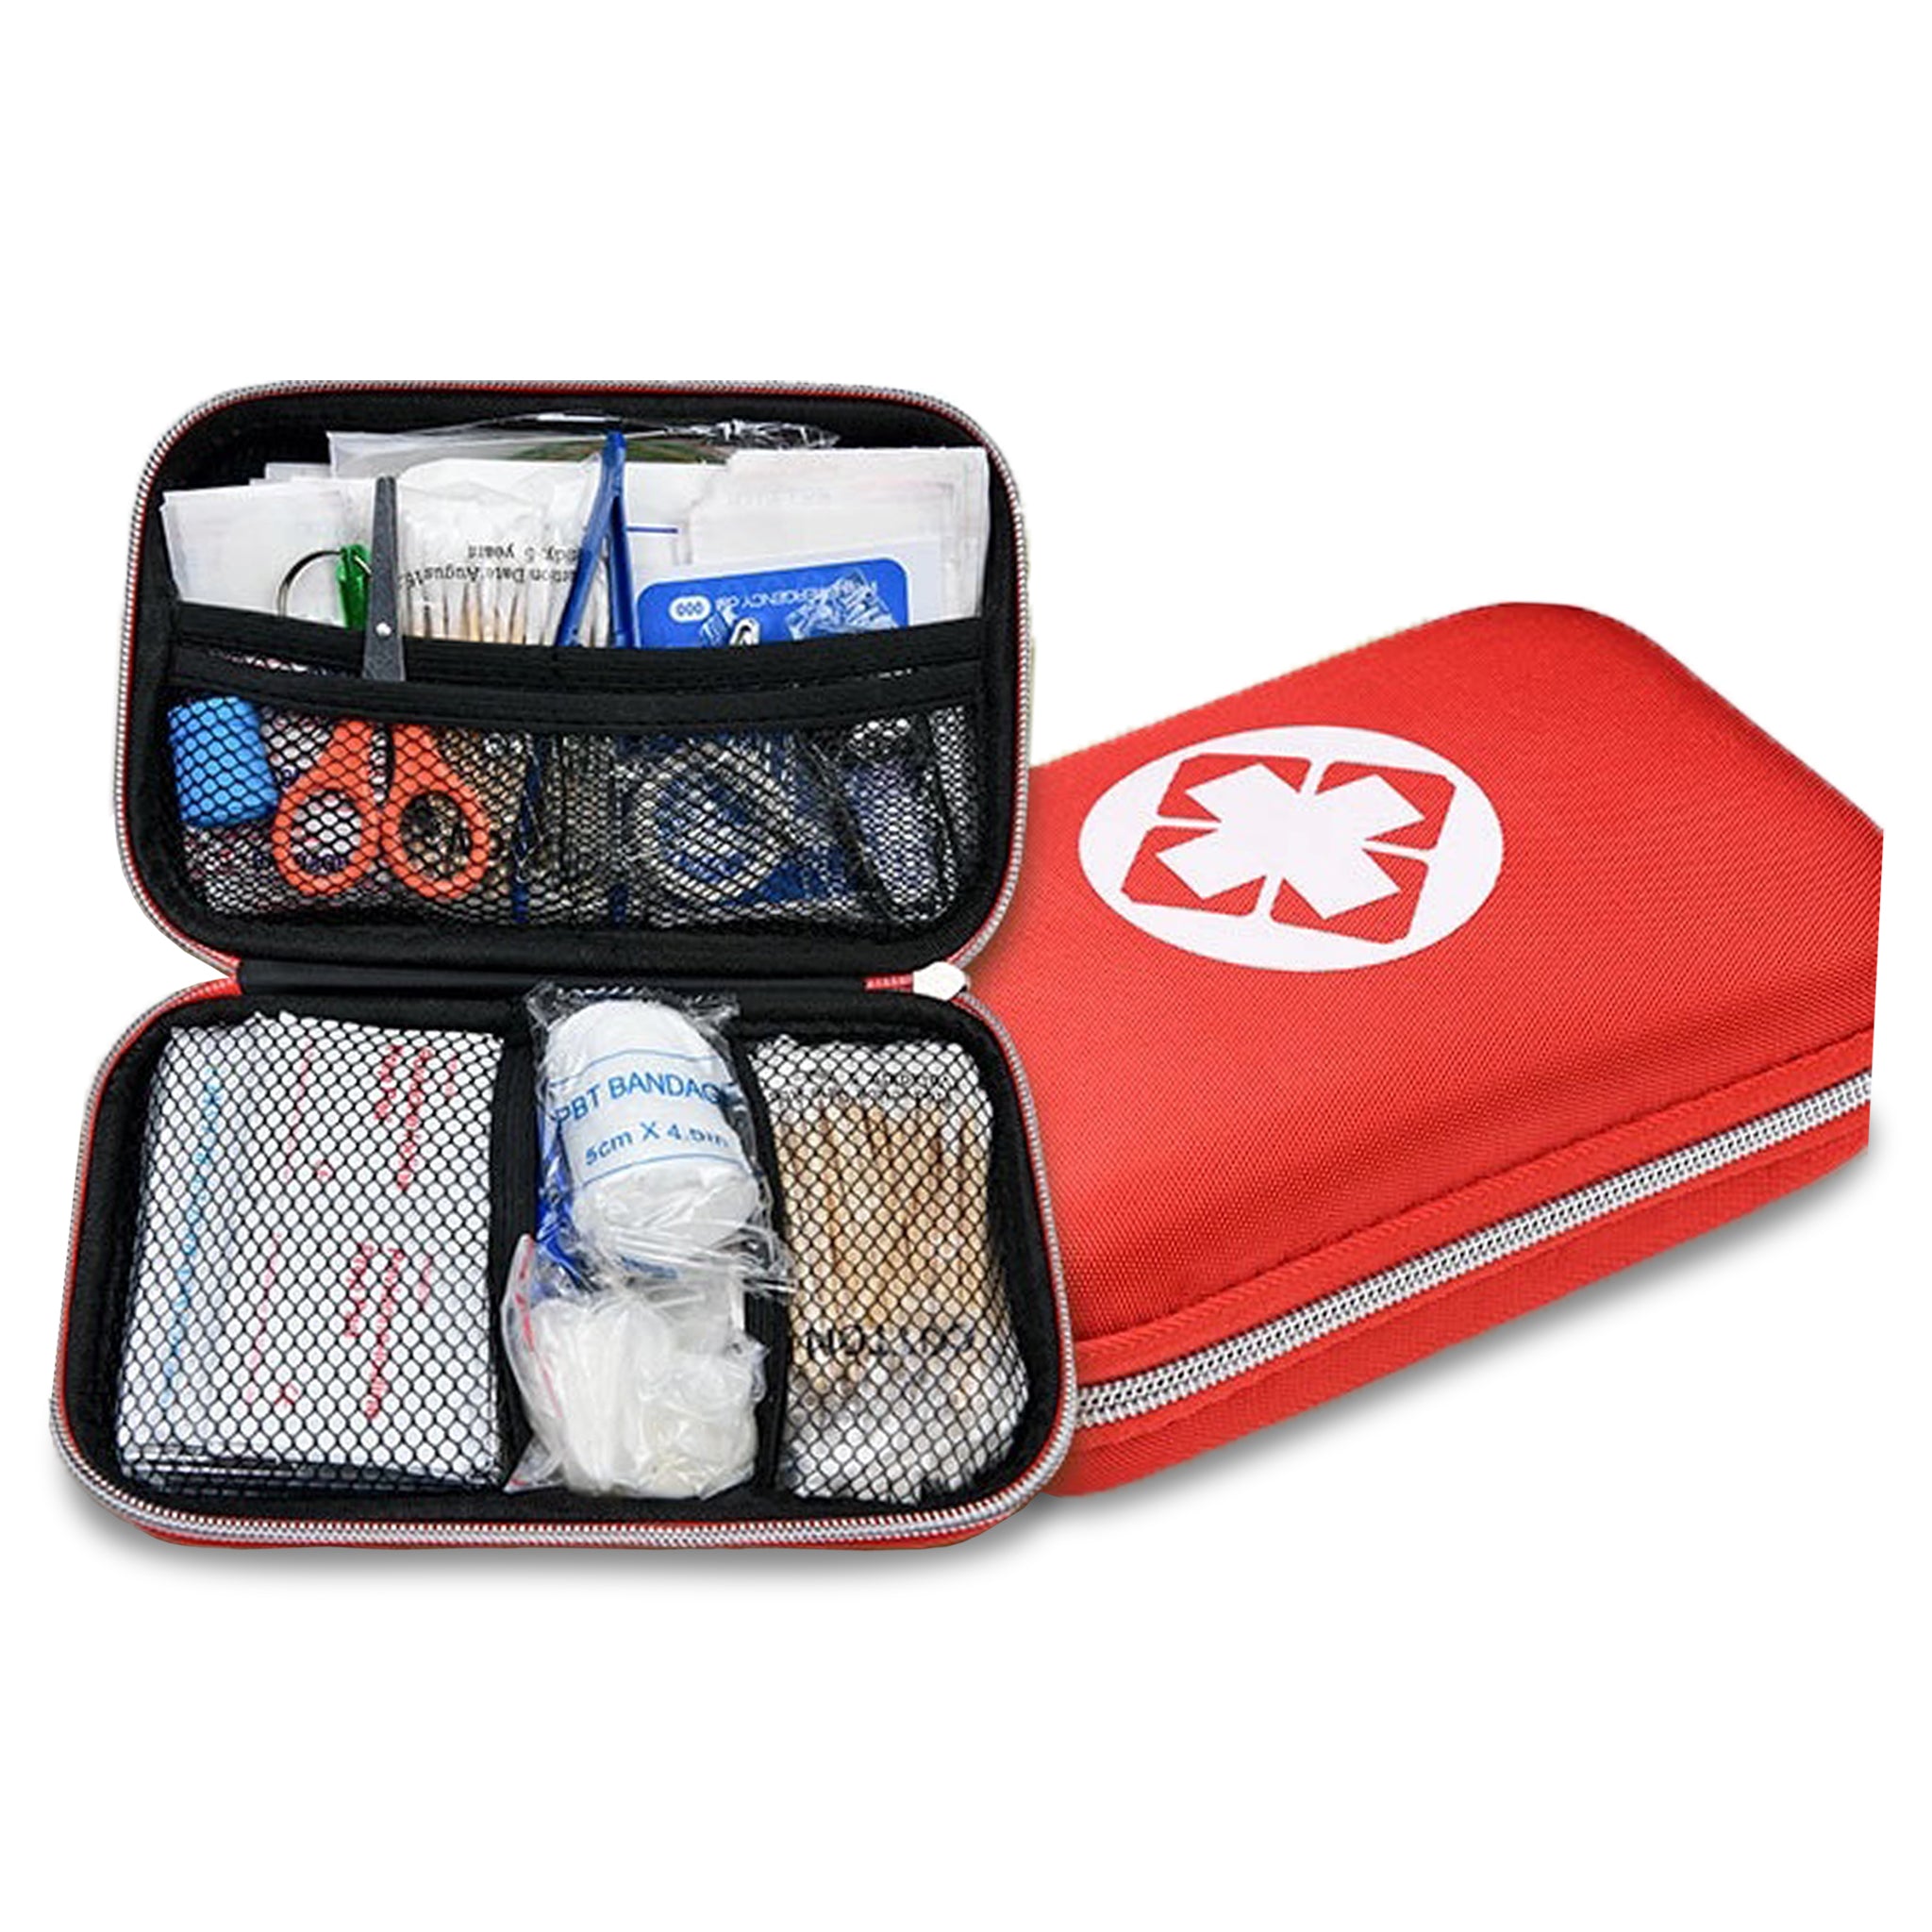 PUMICE - Emergency Survival Kit - Compass Nature, first aid kit, fishing gear, shelter. bug out bag, emergency kit for hiking, camping, outdoor survival. prepare yourself for emergency.